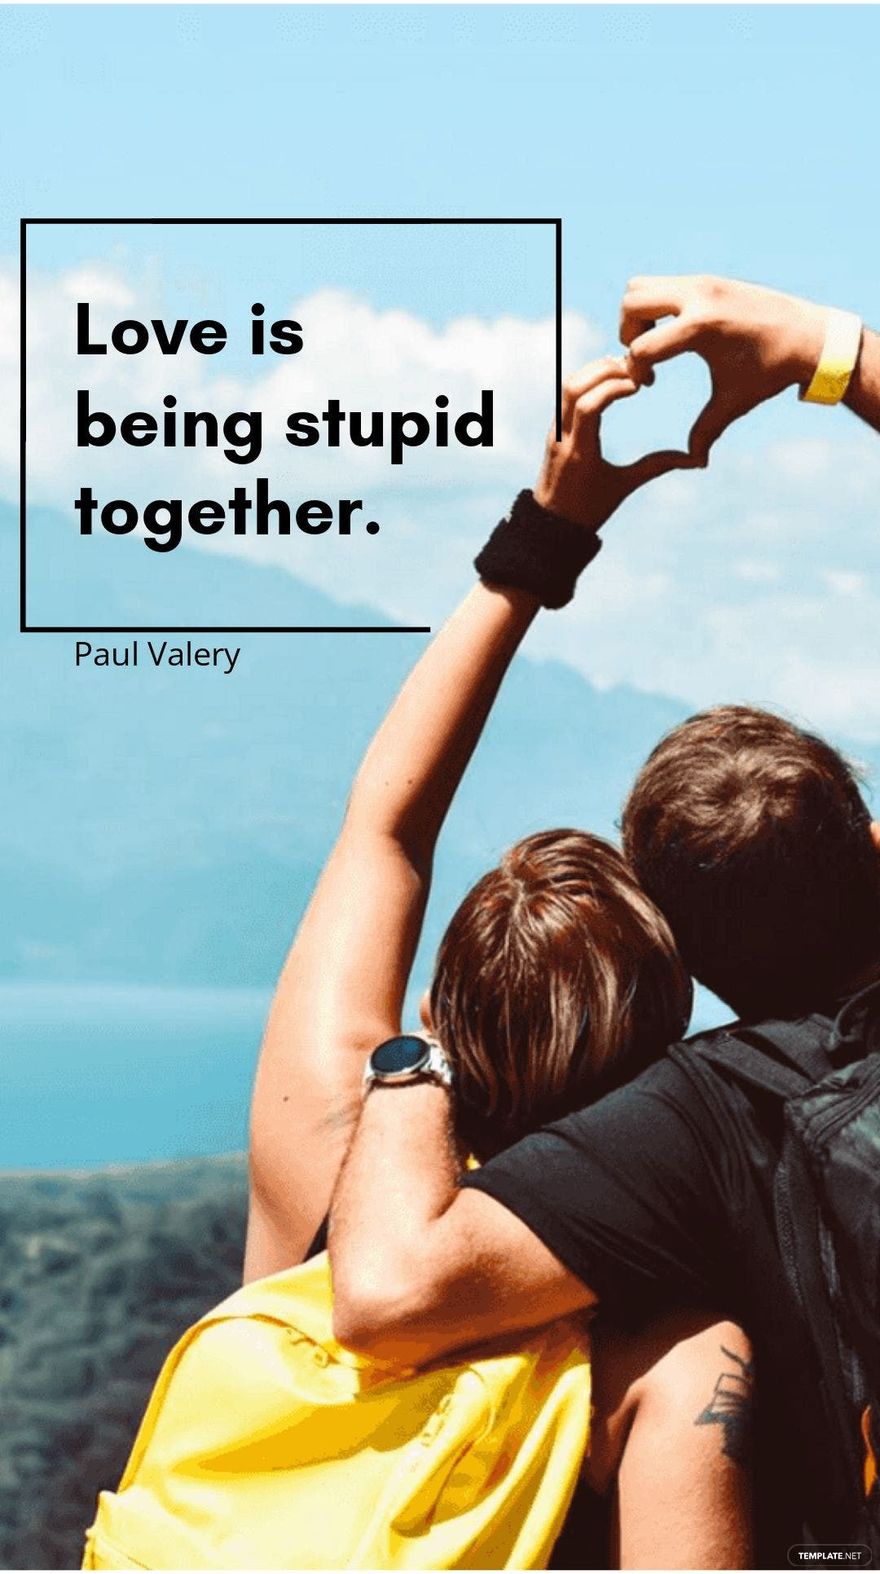 Paul Valery - "Love is being stupid together.”